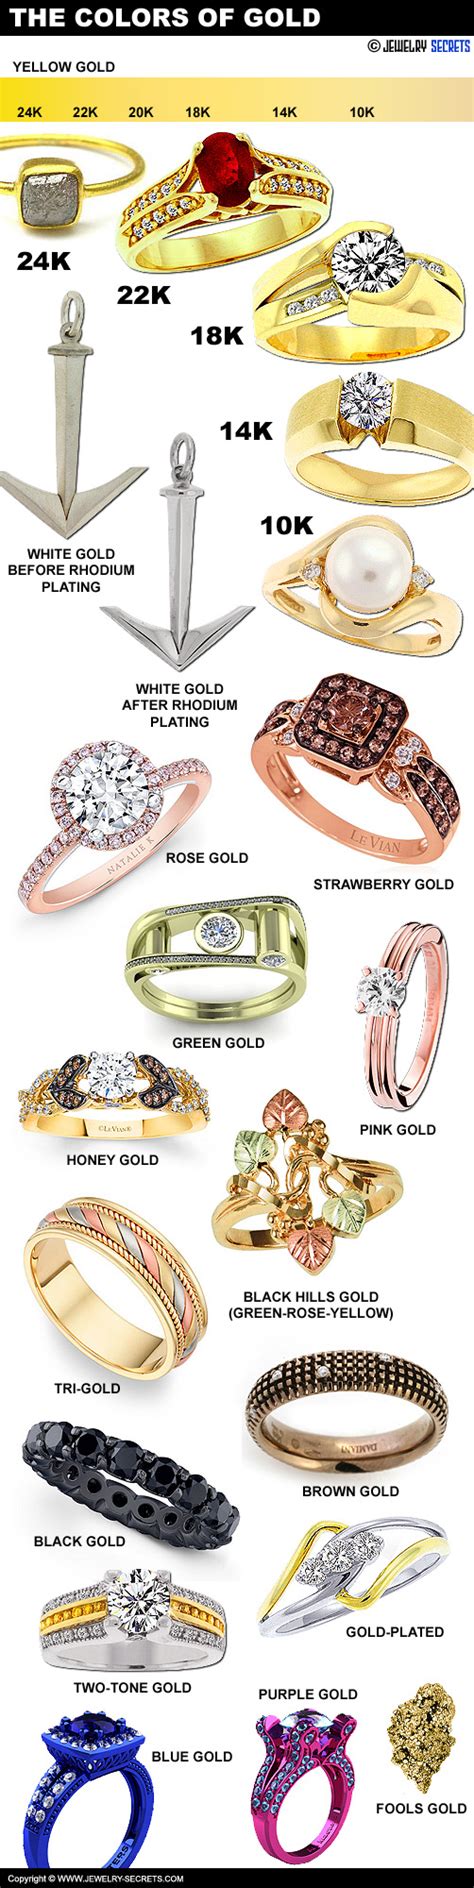 Different Colors Of Gold Jewelry Secrets